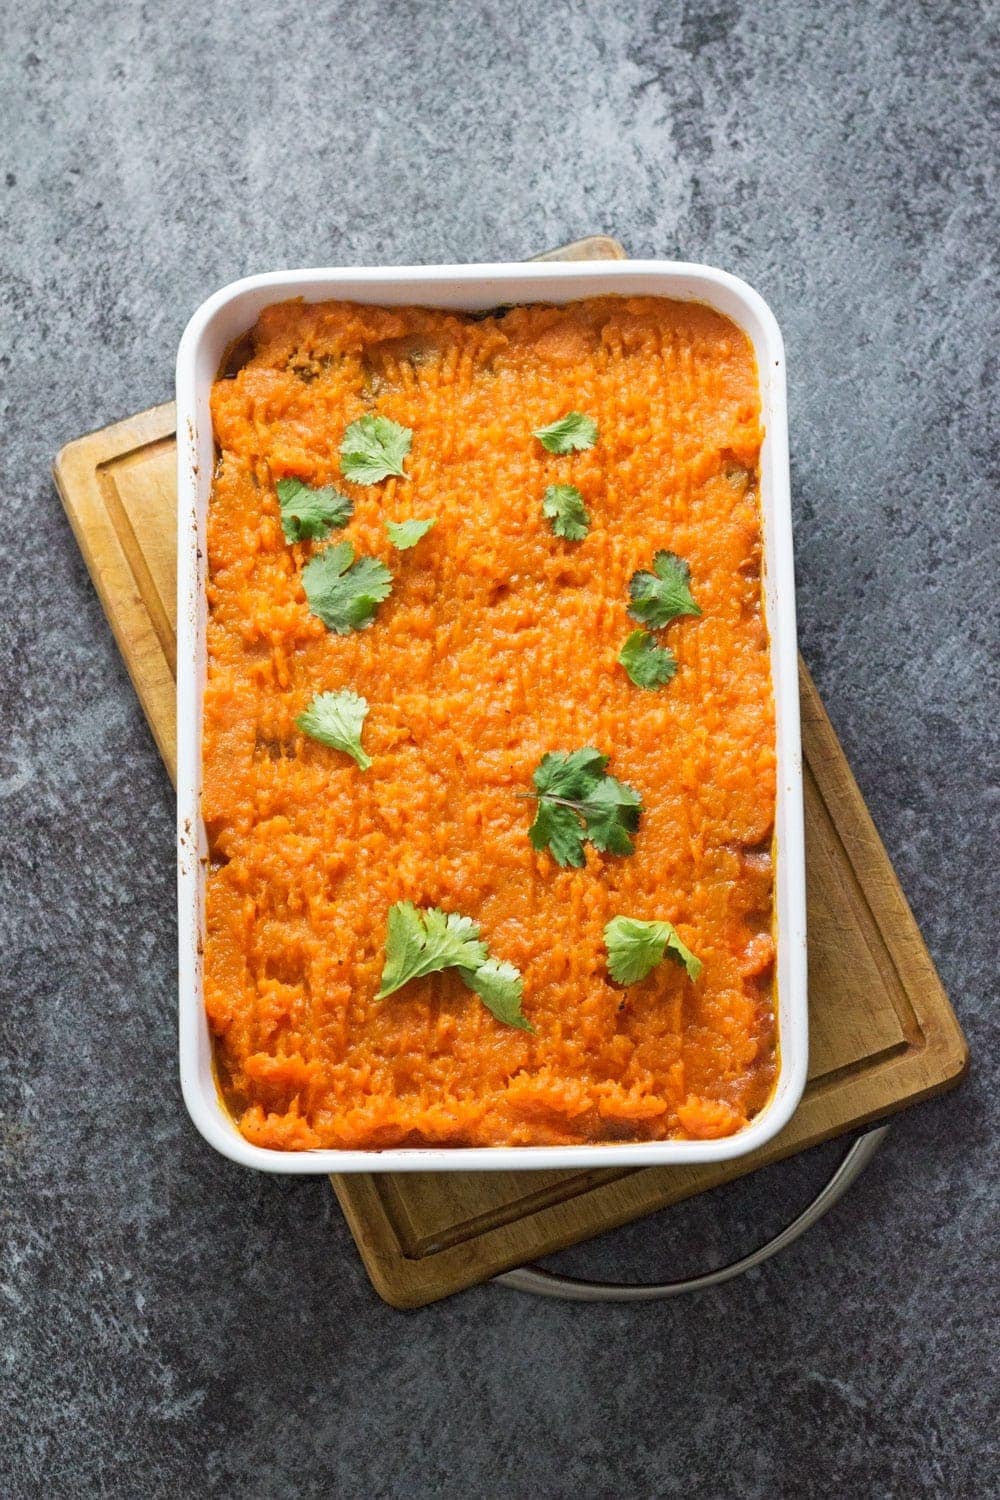 This Moroccan cottage pie is a brilliant twist on a traditional recipe. The beef is spiced with ras-el-hanout and cumin and topped with mashed sweet potato.